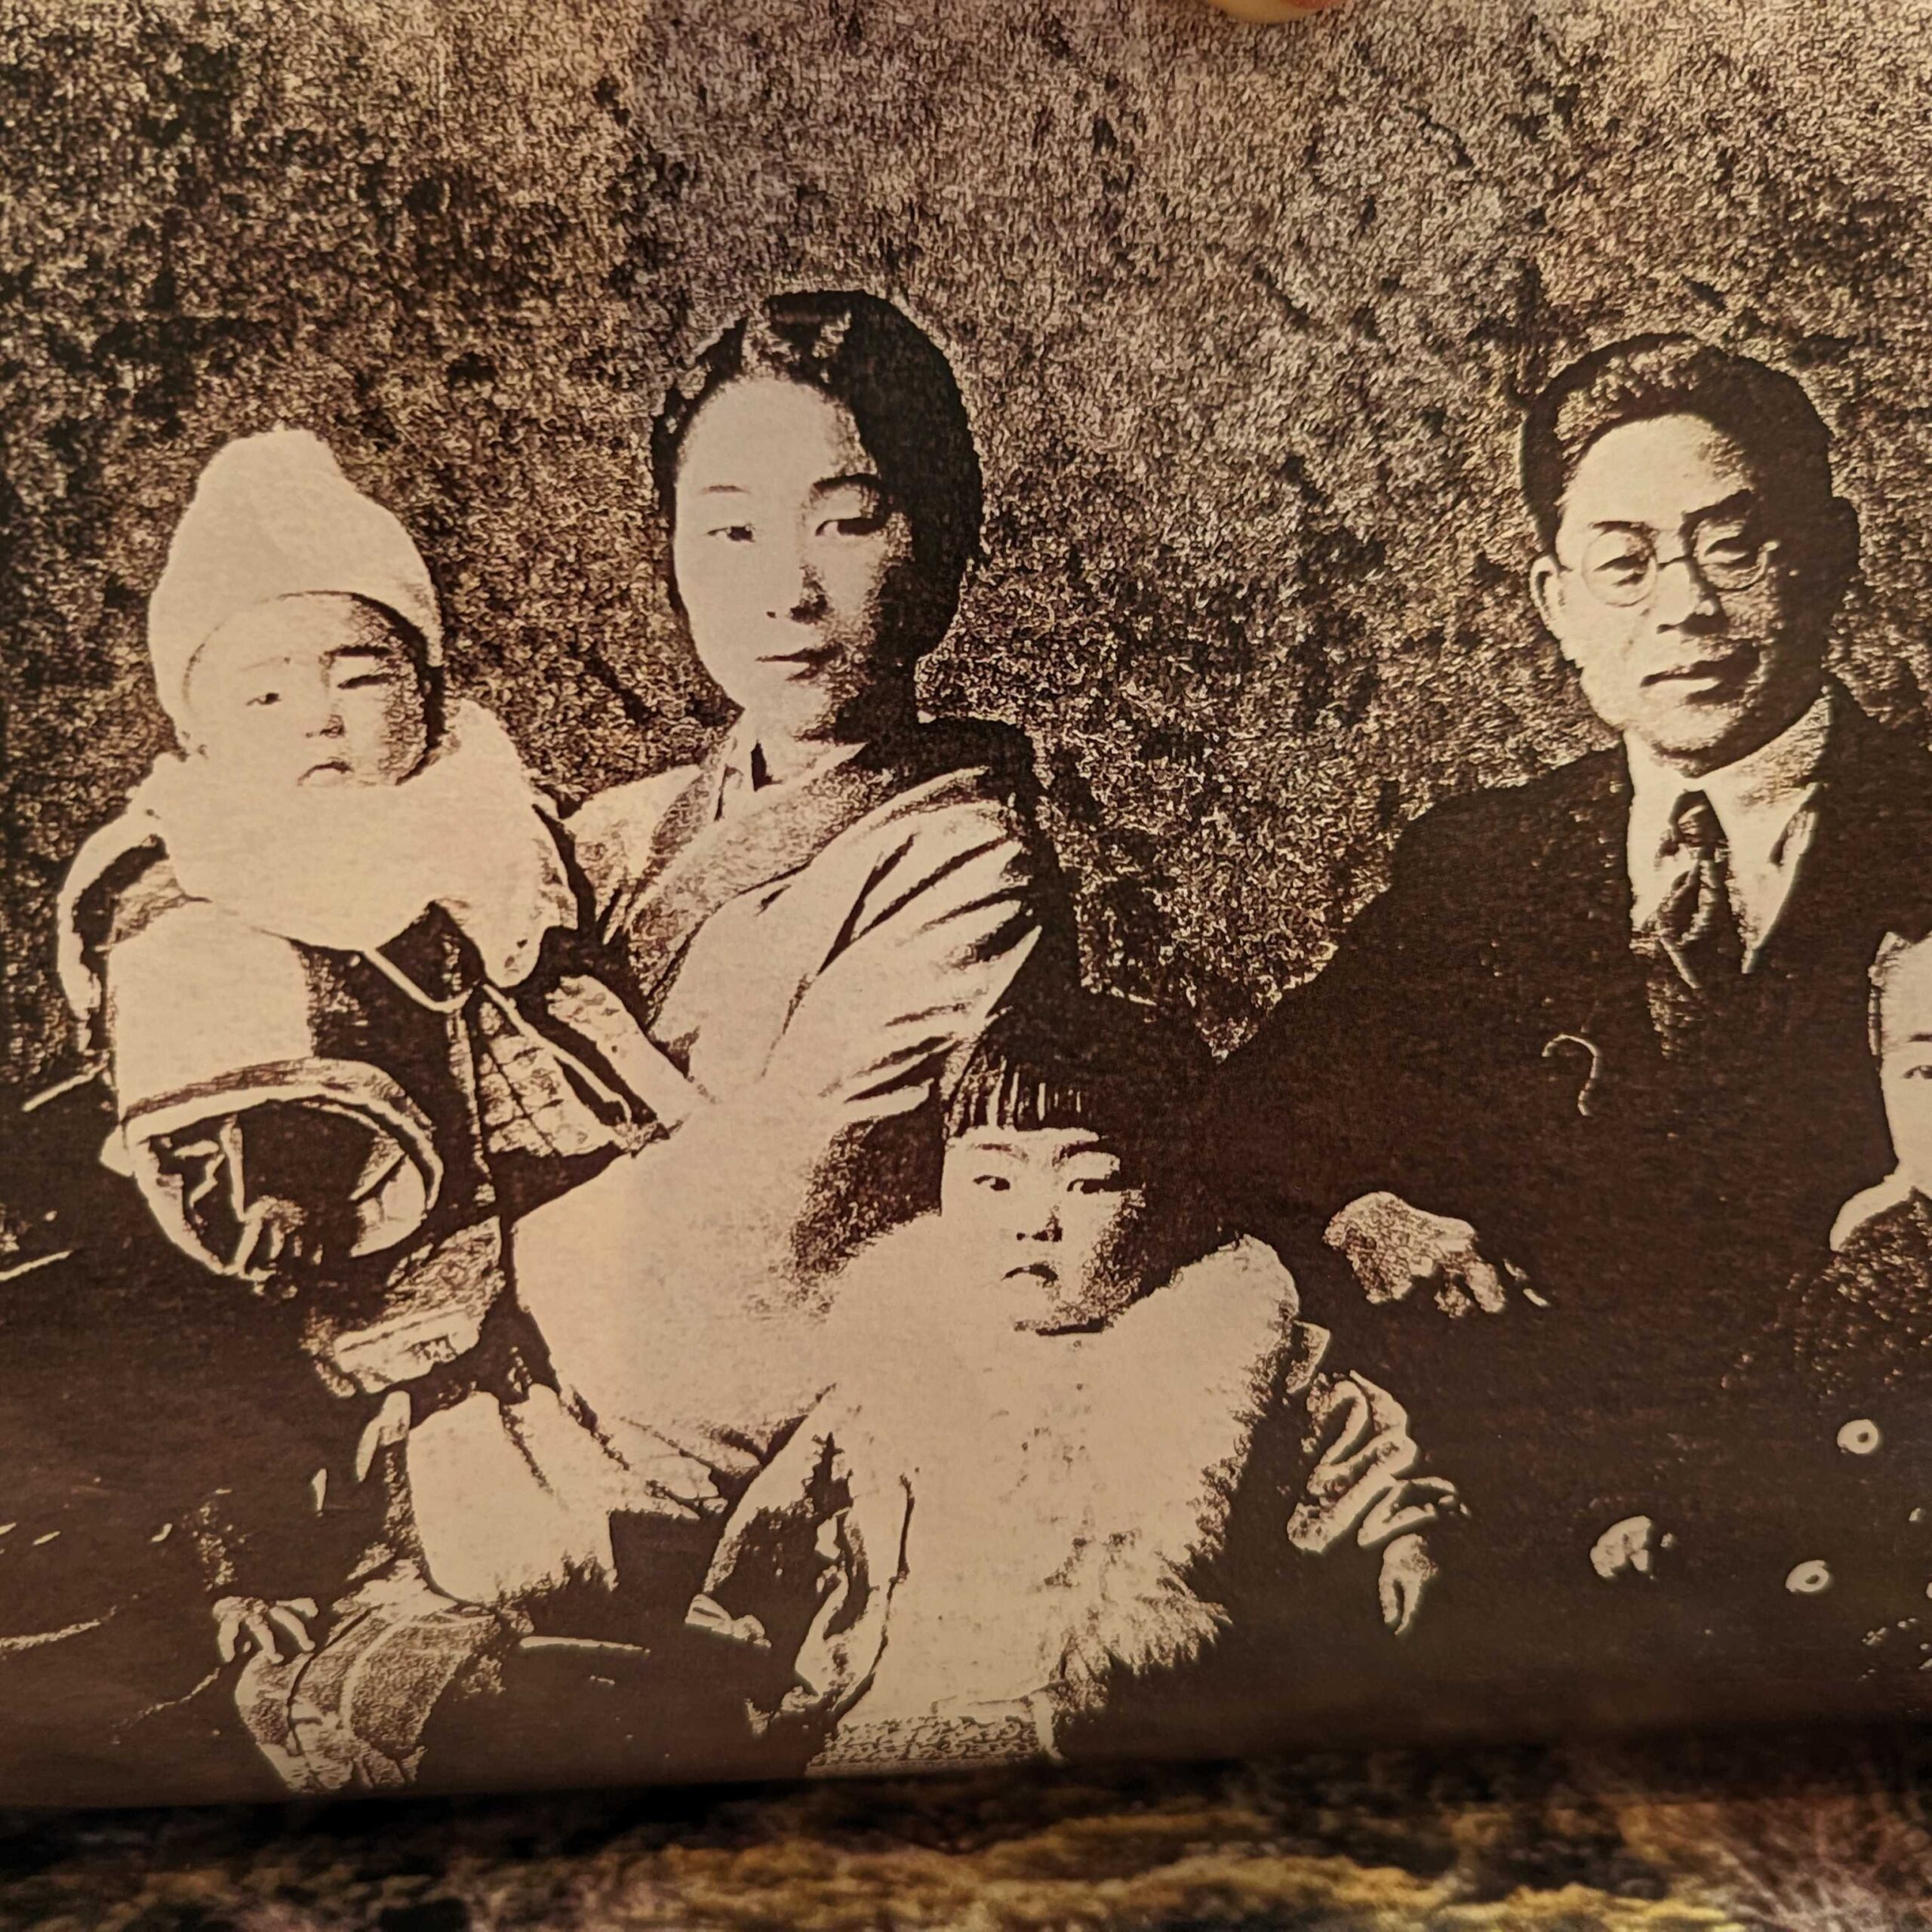 At the age of 28, with her husband and children. (Source: Courtesy of family)